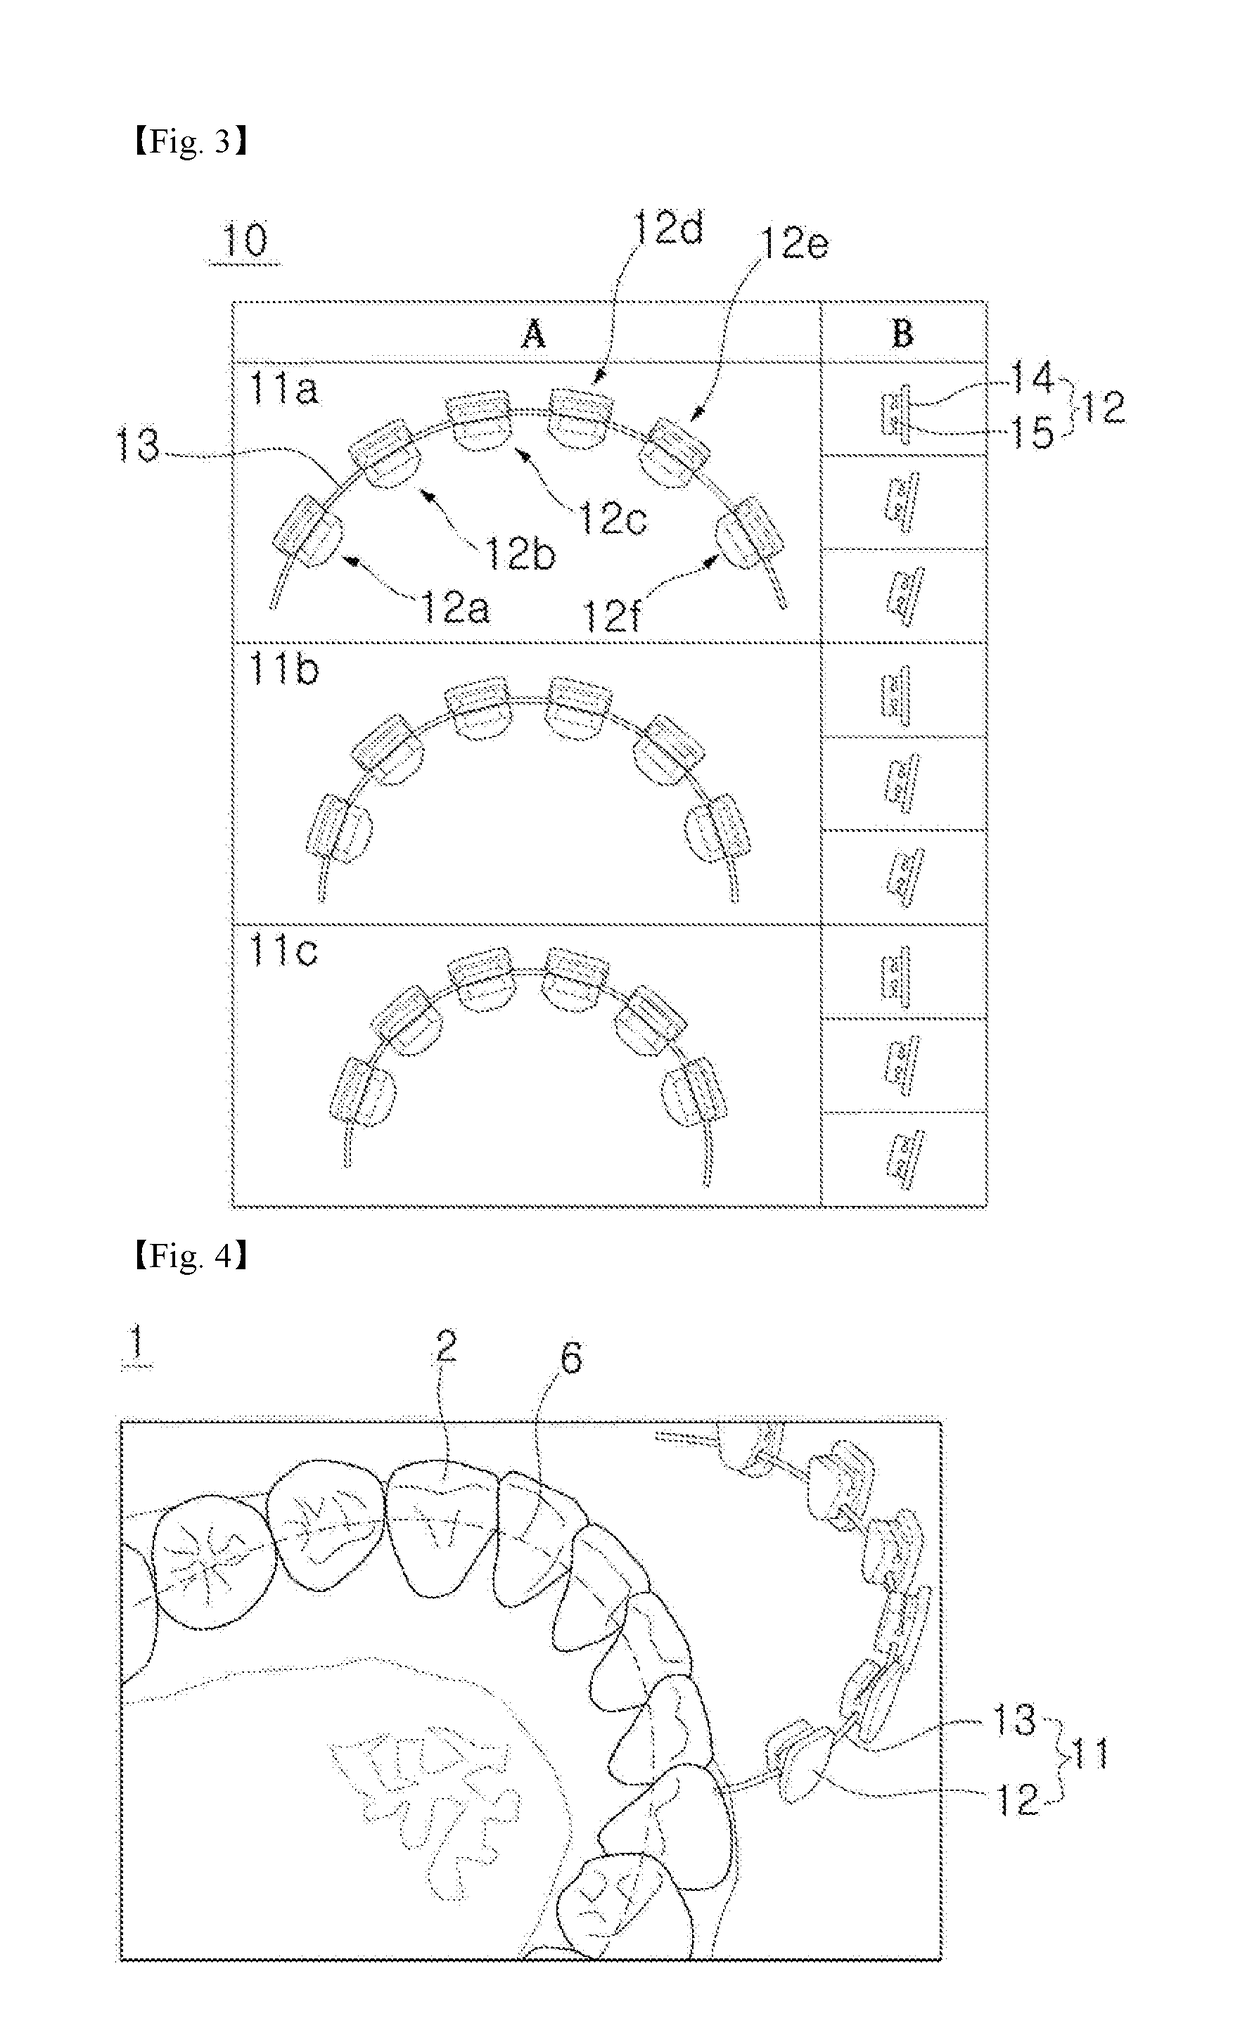 Orthodontic digital bracket for using digital library and method of manufacturing the same